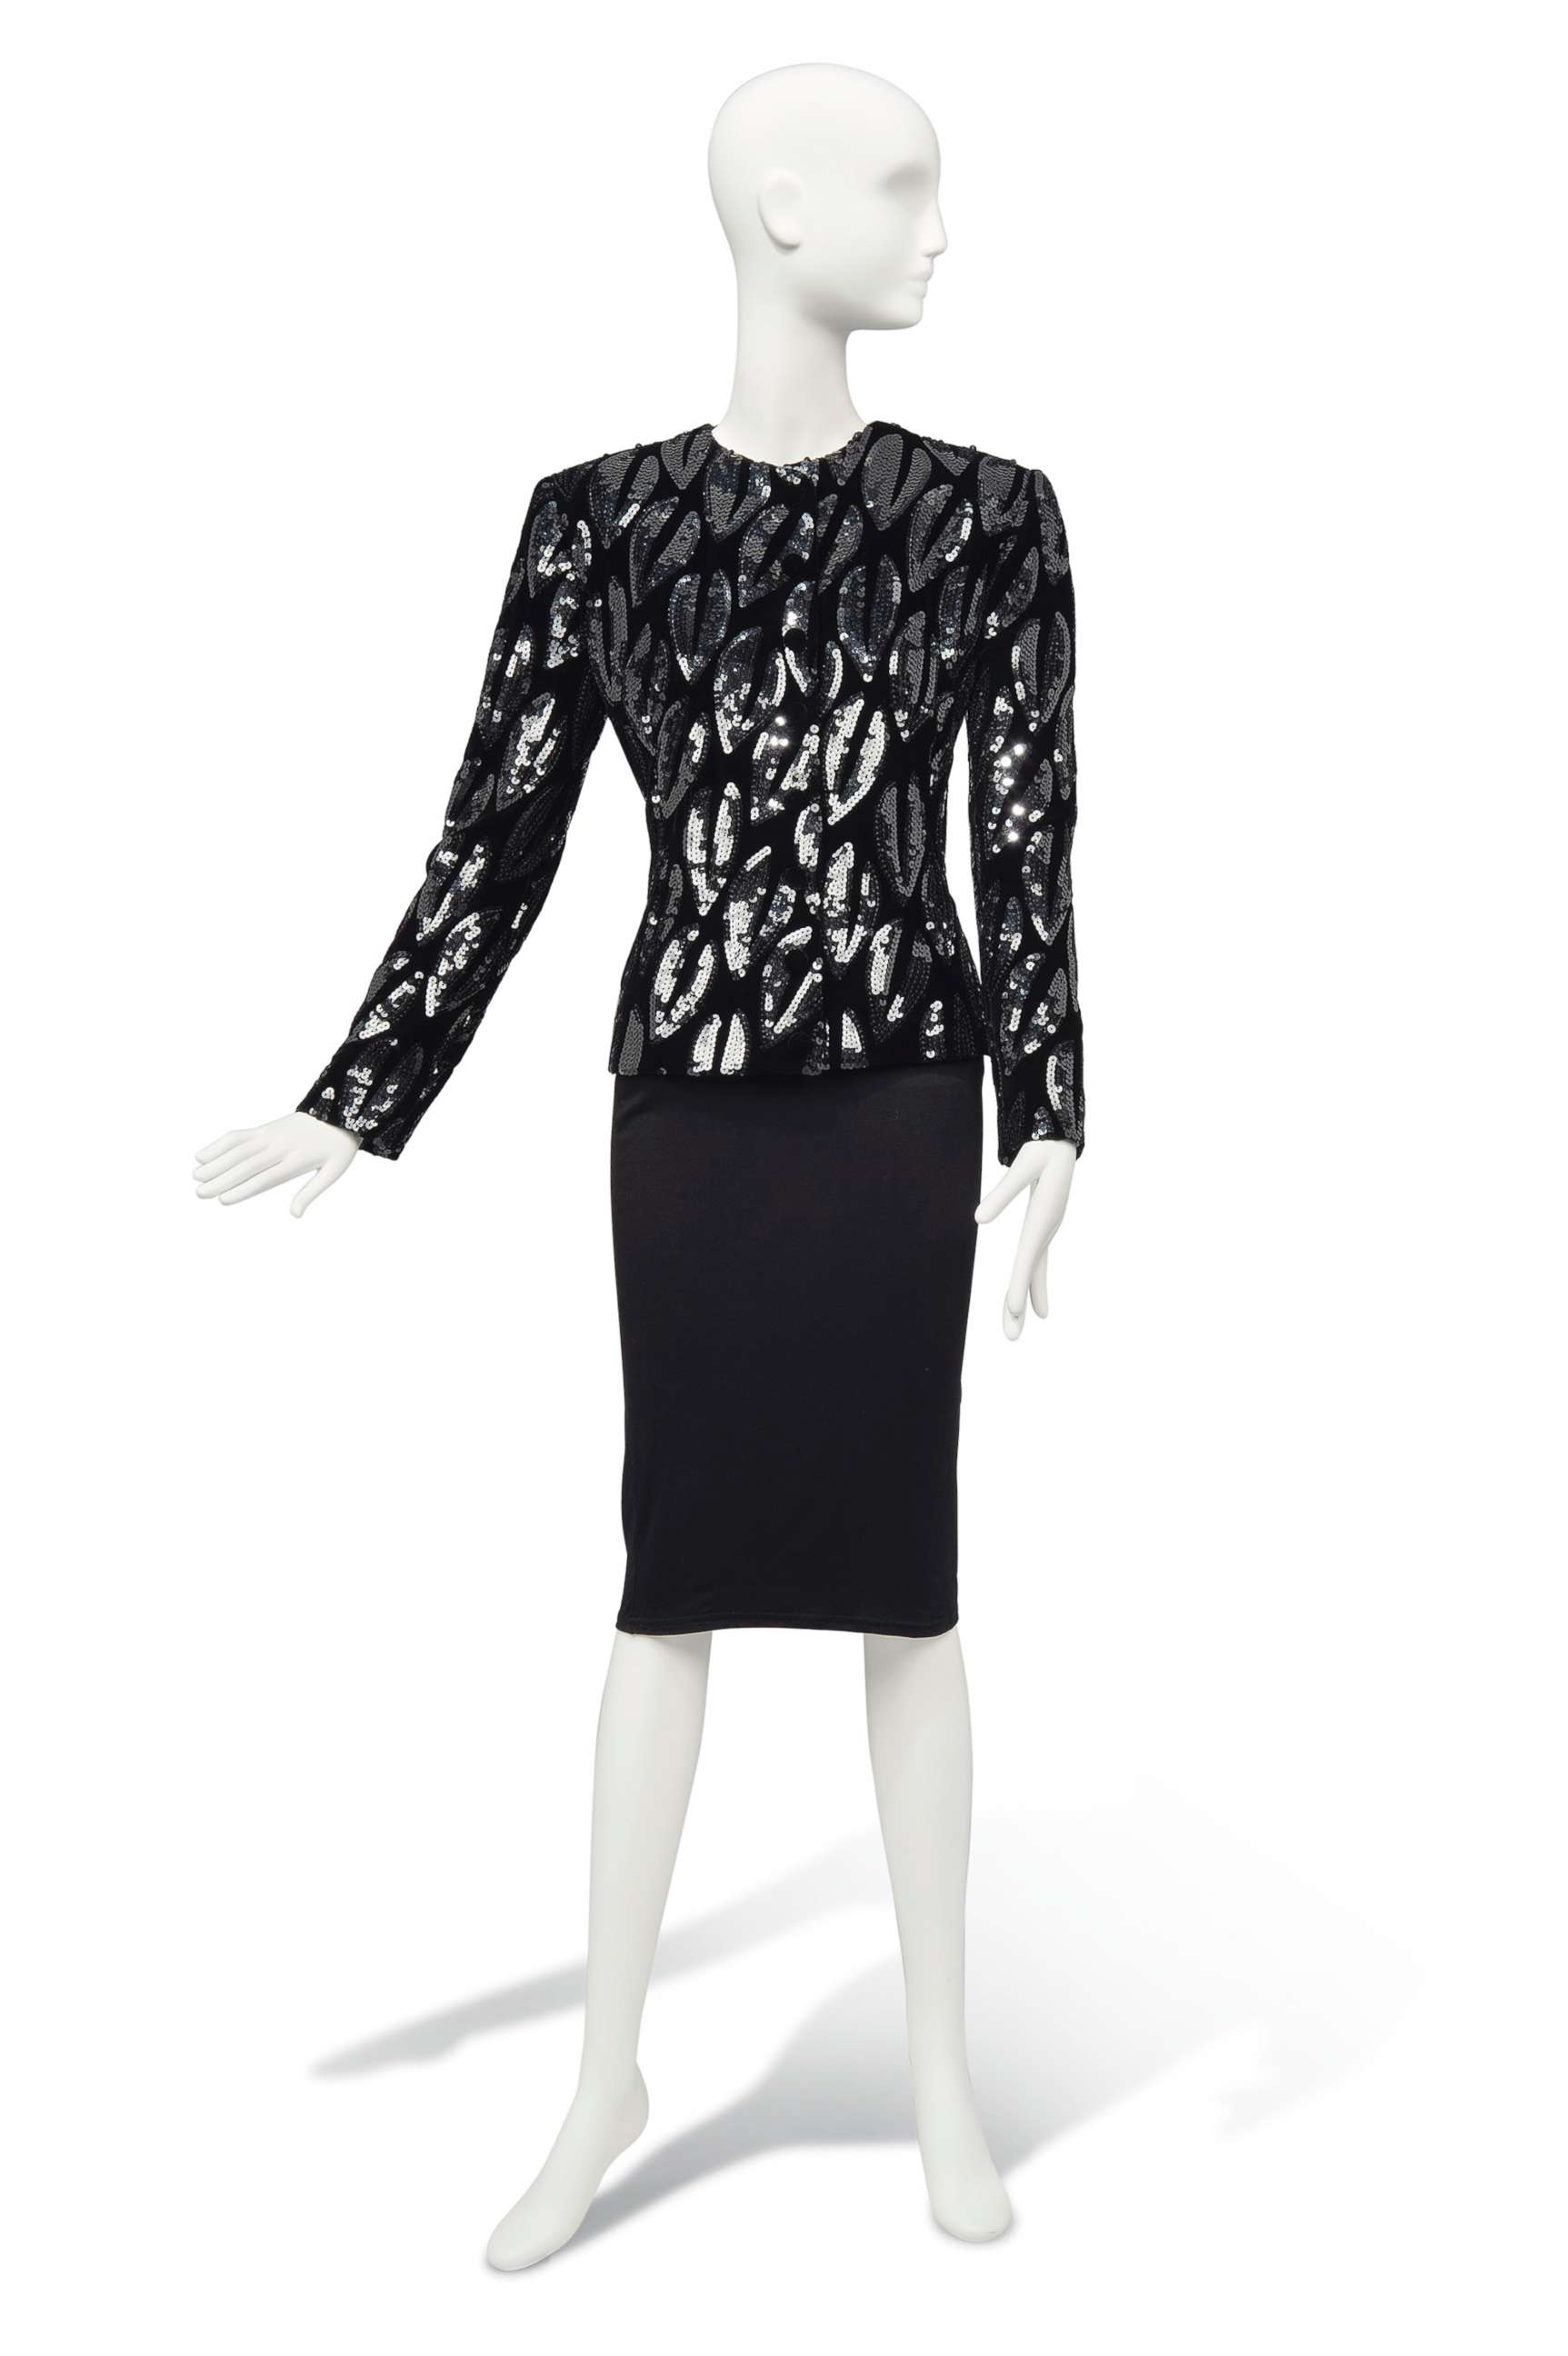 PHOTO: Seen in this photo, a Giorgio Armani black, velvet sequinned evening jacket once belonging to Audrey Heburn.